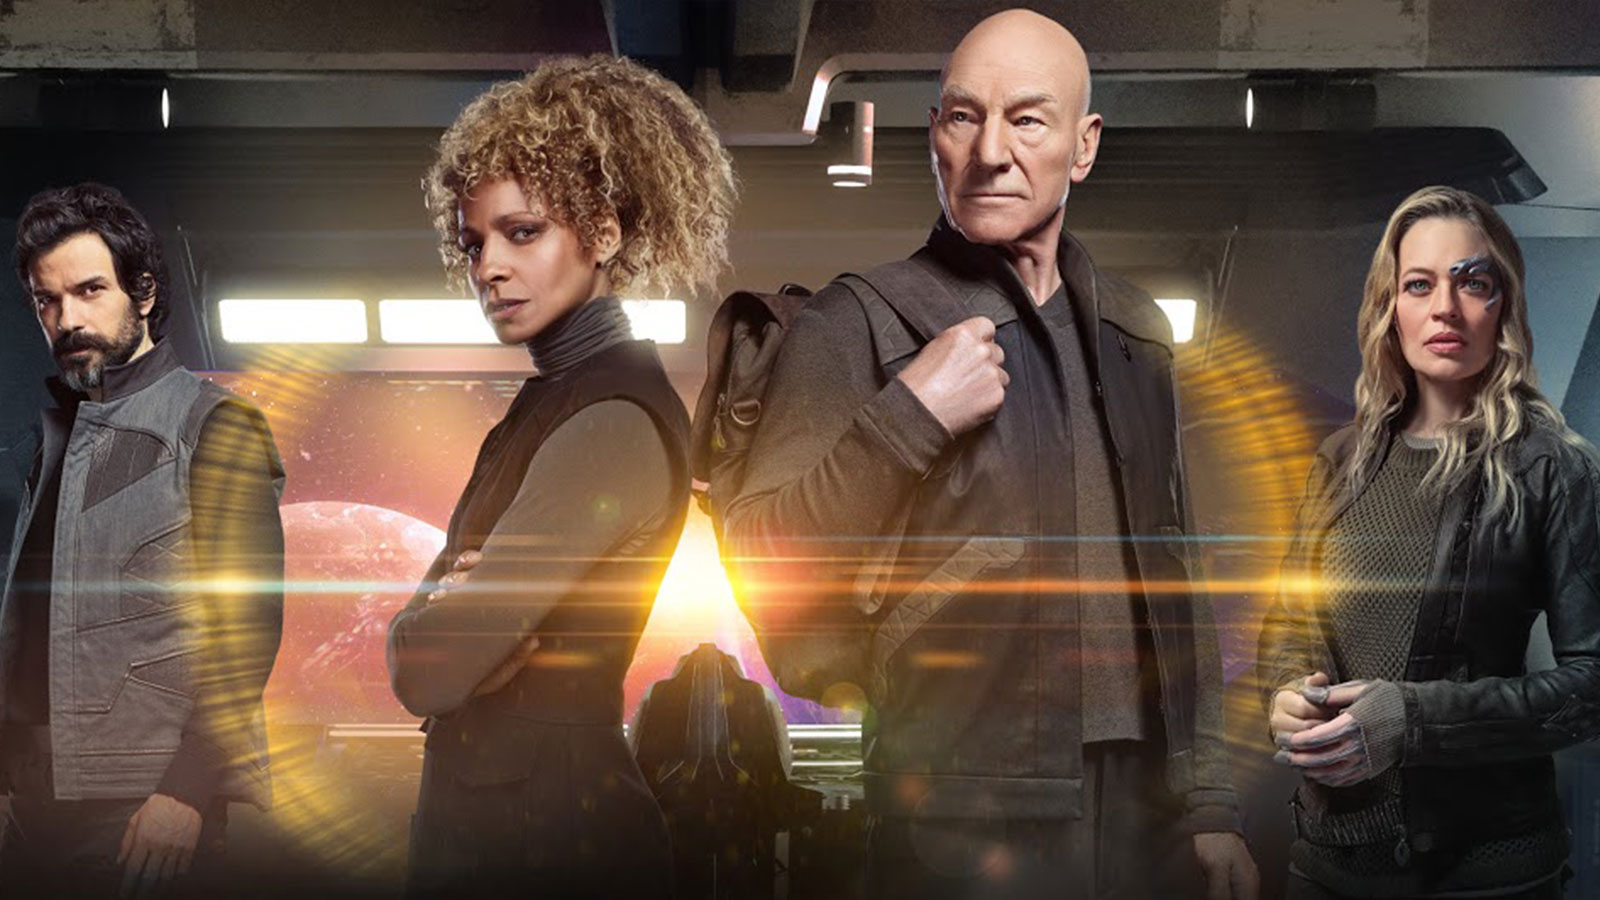 Watch Every Episode Of STAR TREK: PICARD For Free With A CBS All Access Trial